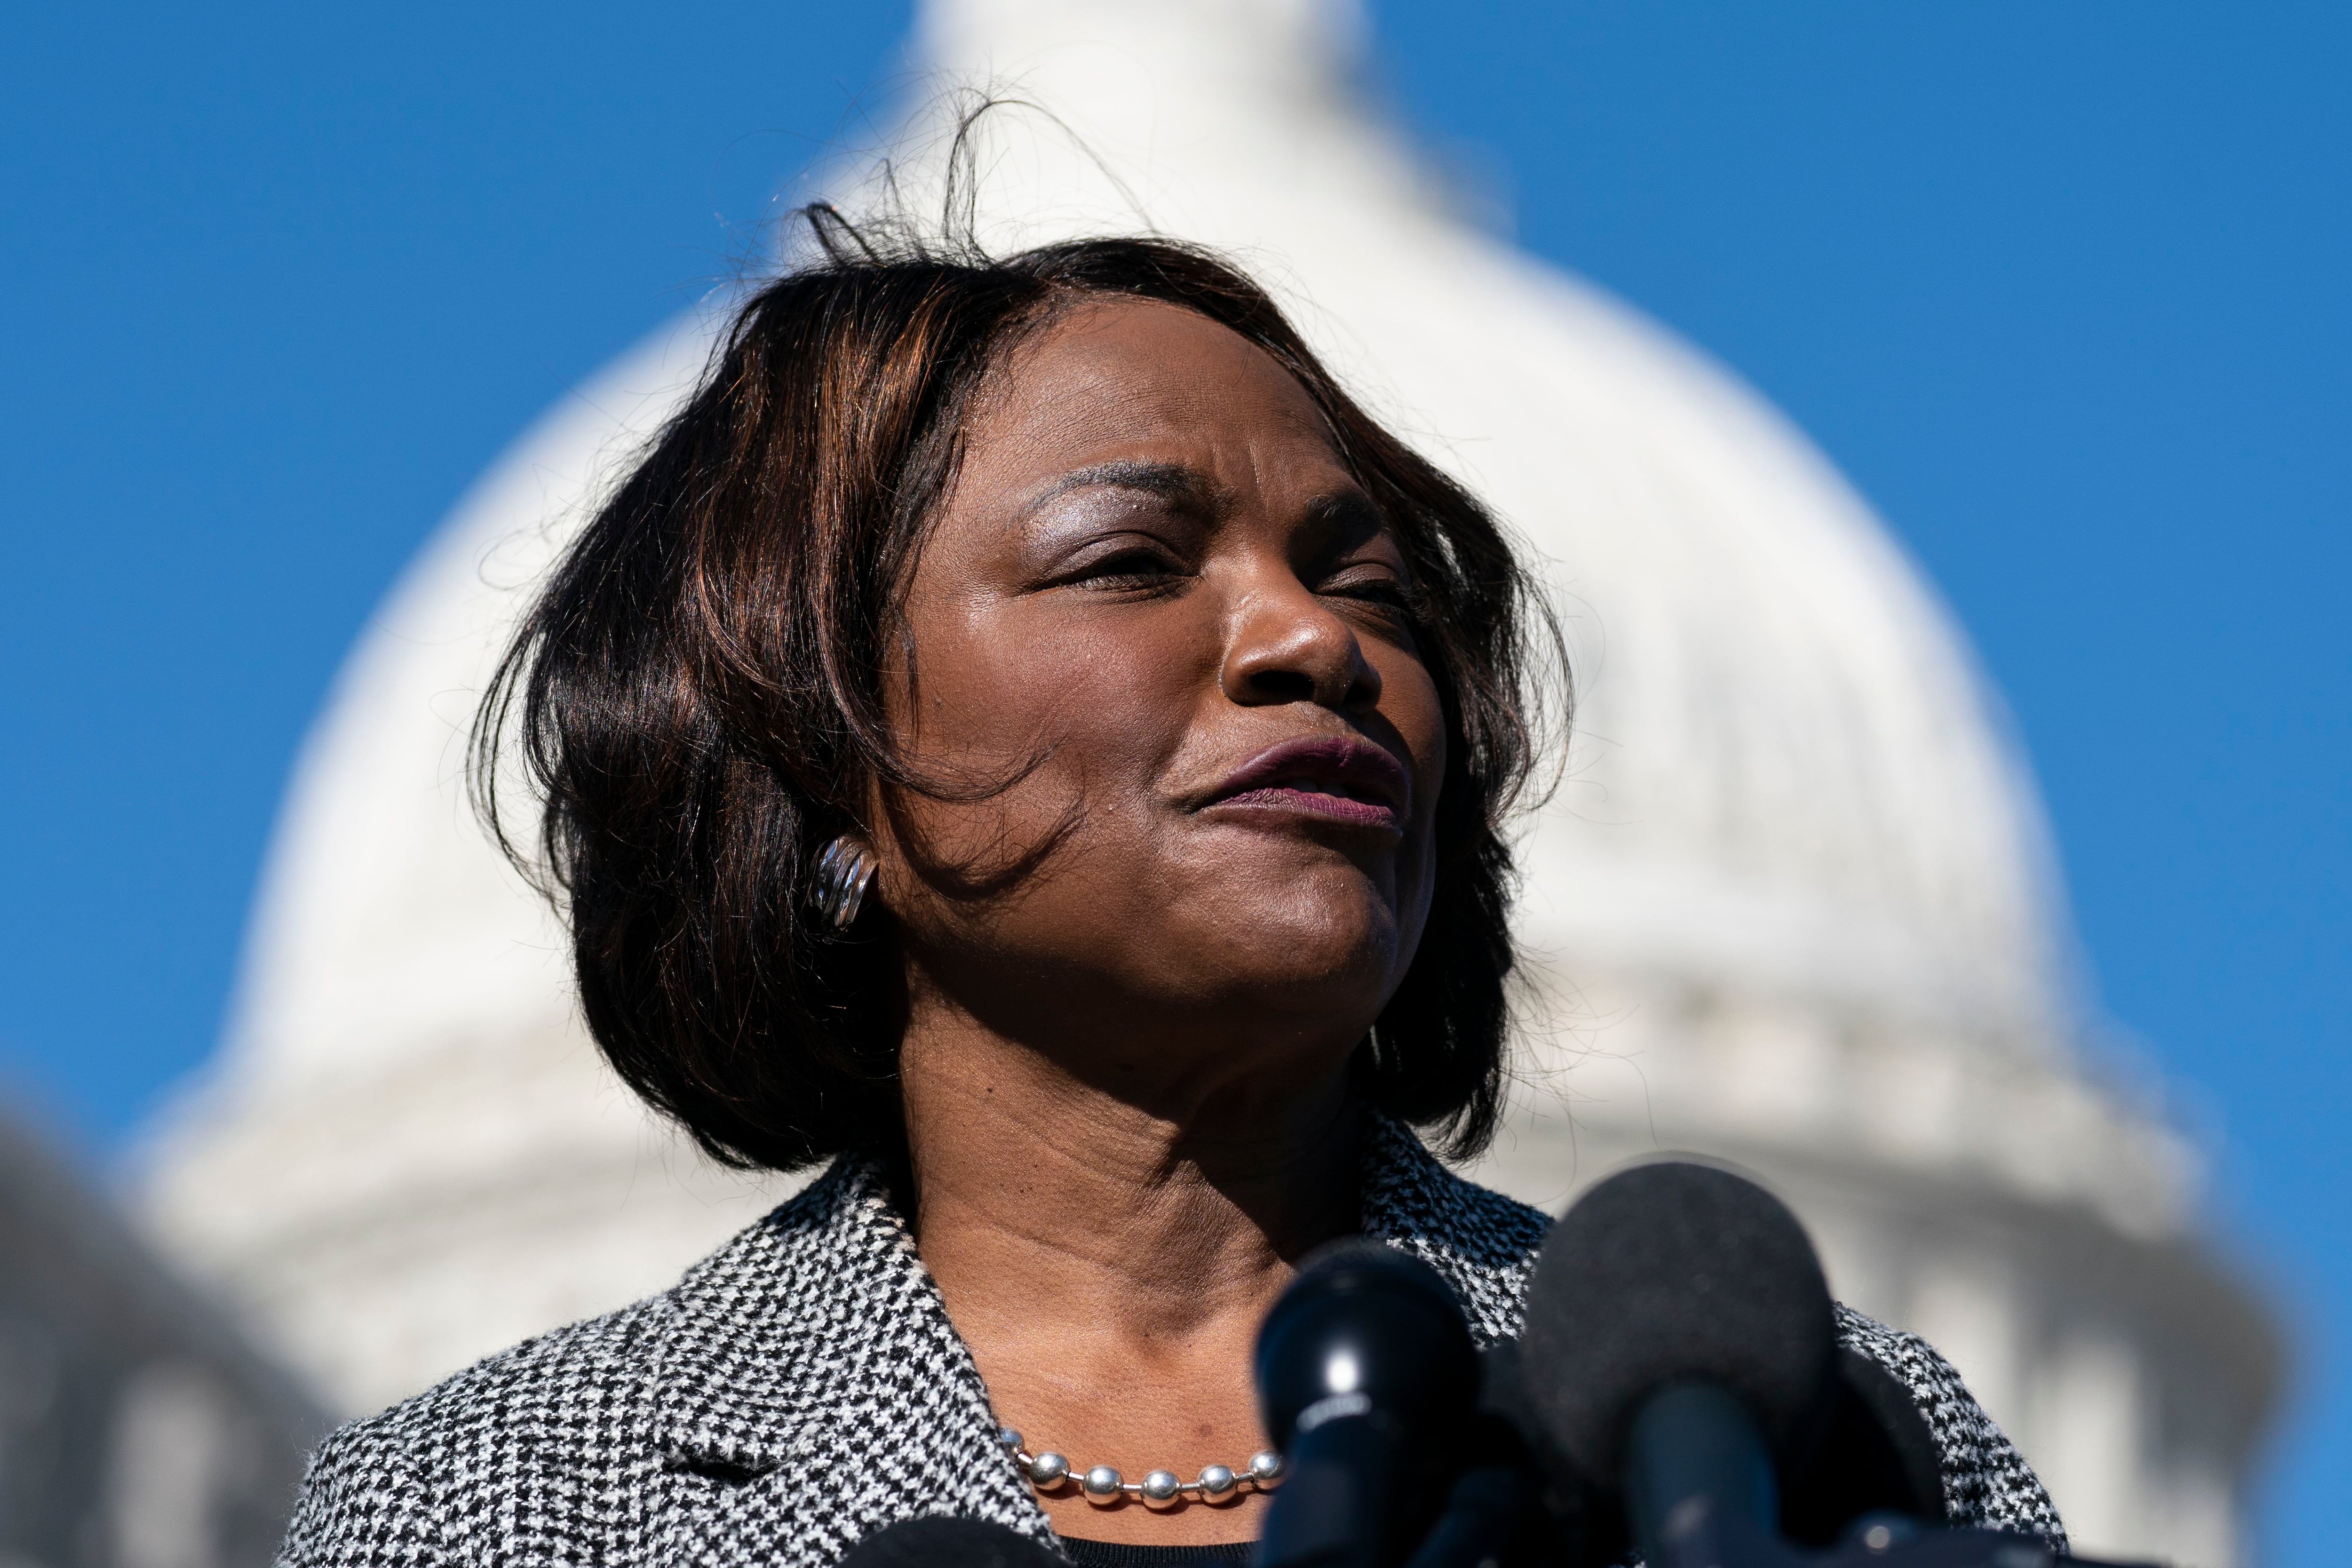 Rep. Val Demings, D-Fla., speaks with reporters about the Violent Incident Clearance and Technological Investigative Methods (VICTIM) Act, on Capitol Hill, Wednesday, Feb. 9, 2022, in Washington. Demings is among dozens of Black Democratic candidates are seeking office in heavily Republican states that former President Donald Trump won easily in 2020. (AP Photo/Alex Brandon)